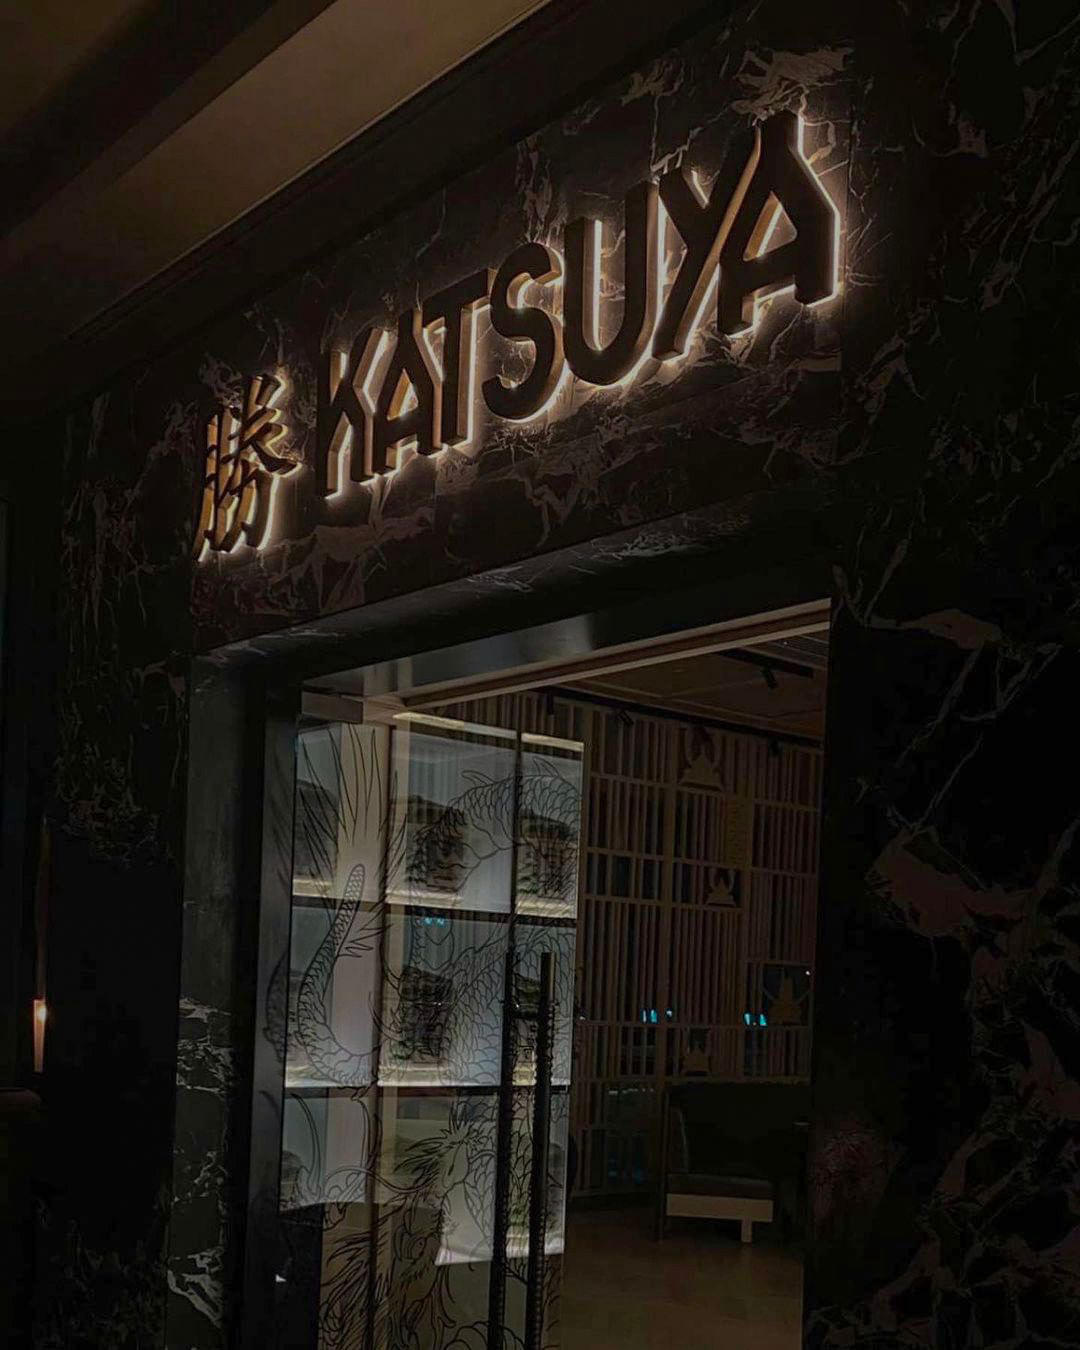 image  1 Hyde Hotel Dubai - Always a warm welcome at Katsuya, are you joining us for Social Hour